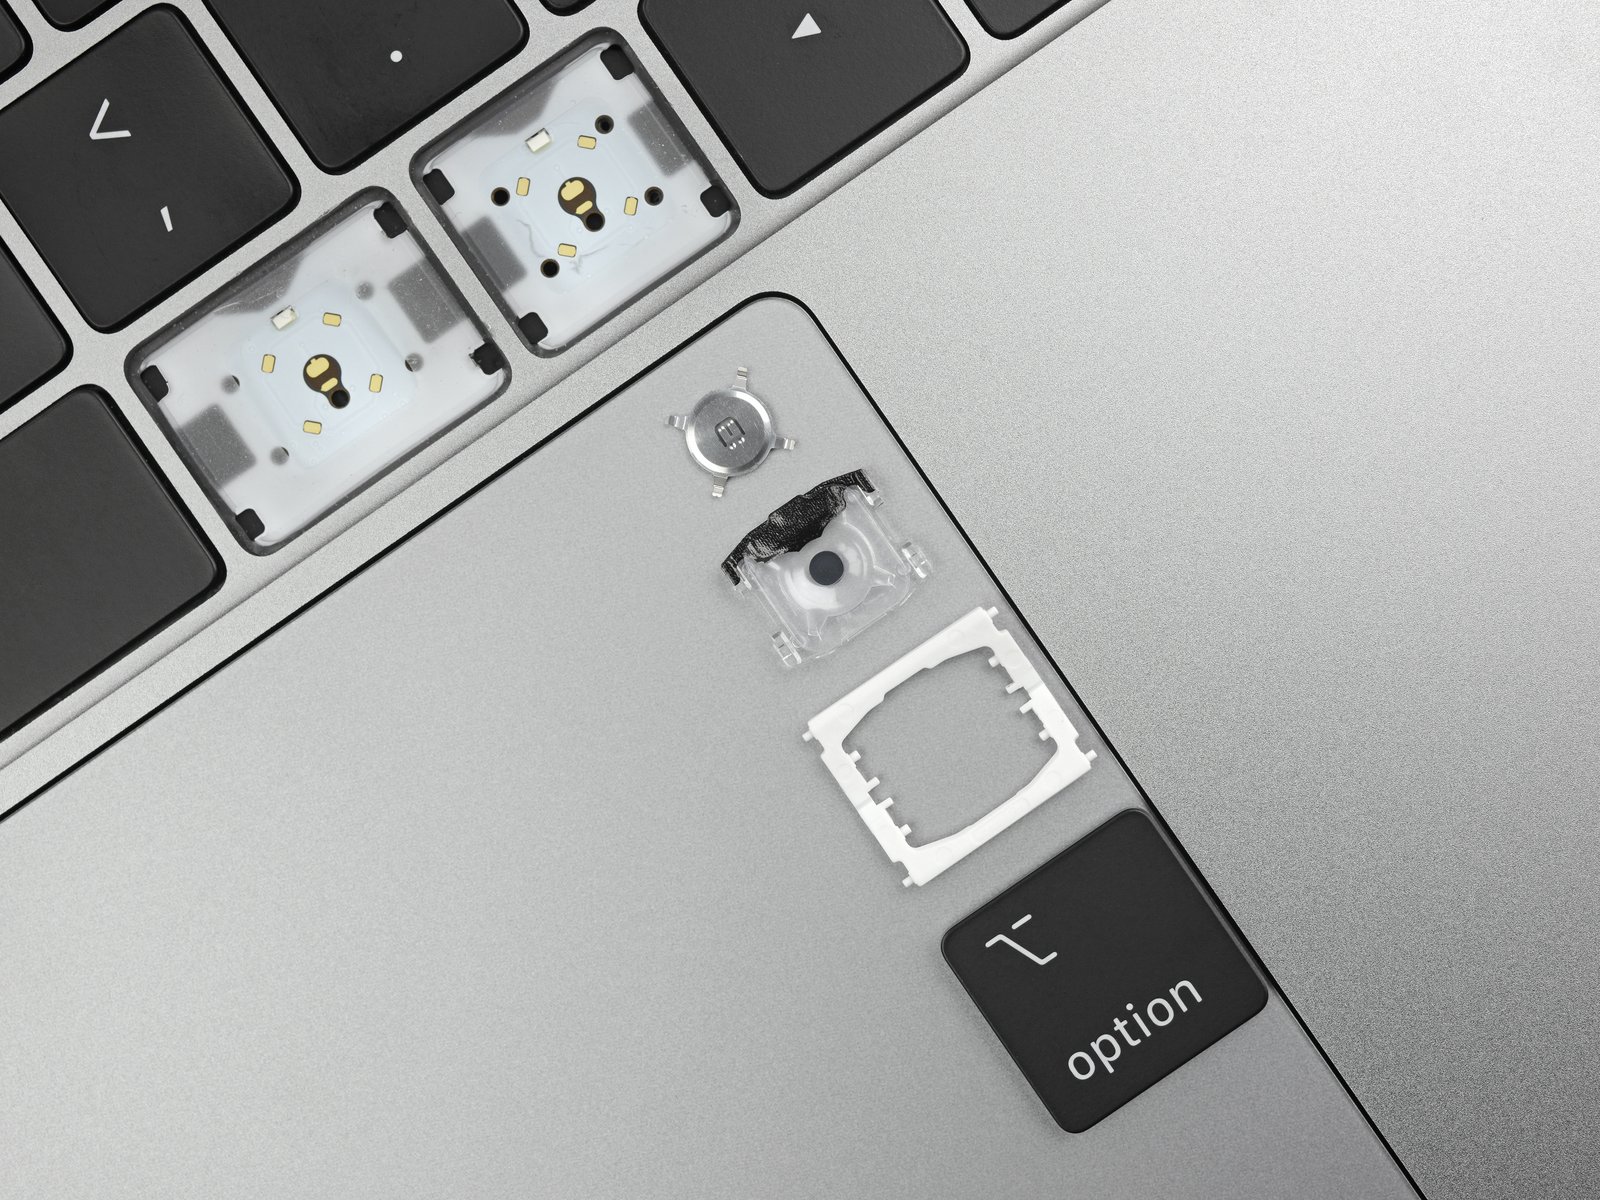 iFixit disassembles new MacBook Pro and detects few butterfly keyboard changes